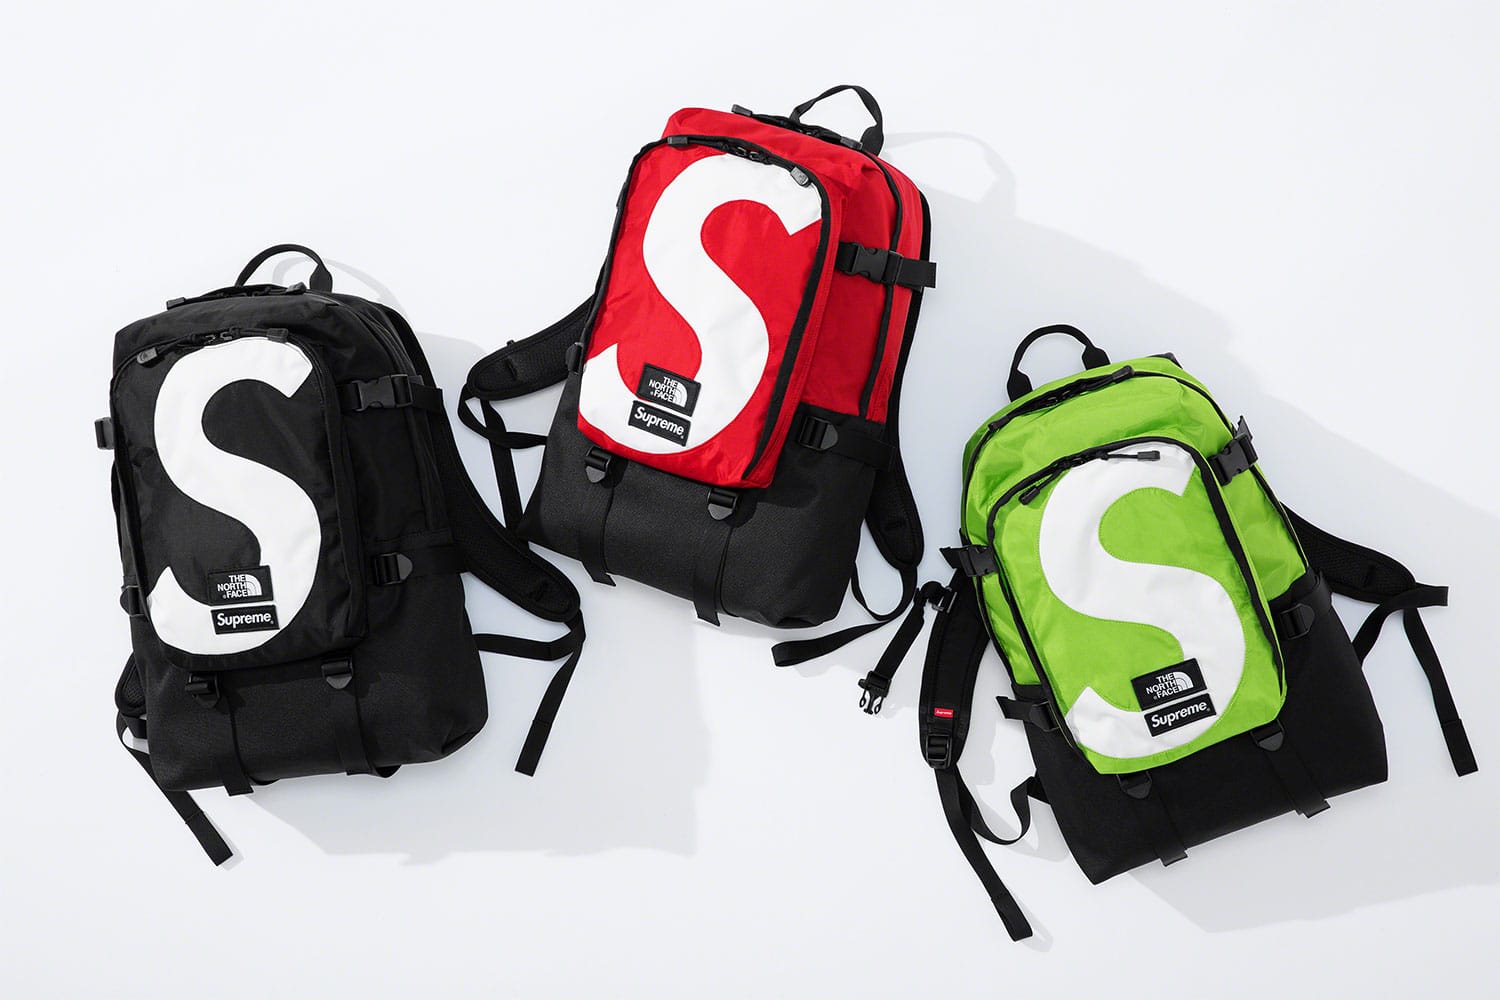 supreme the north face backpack